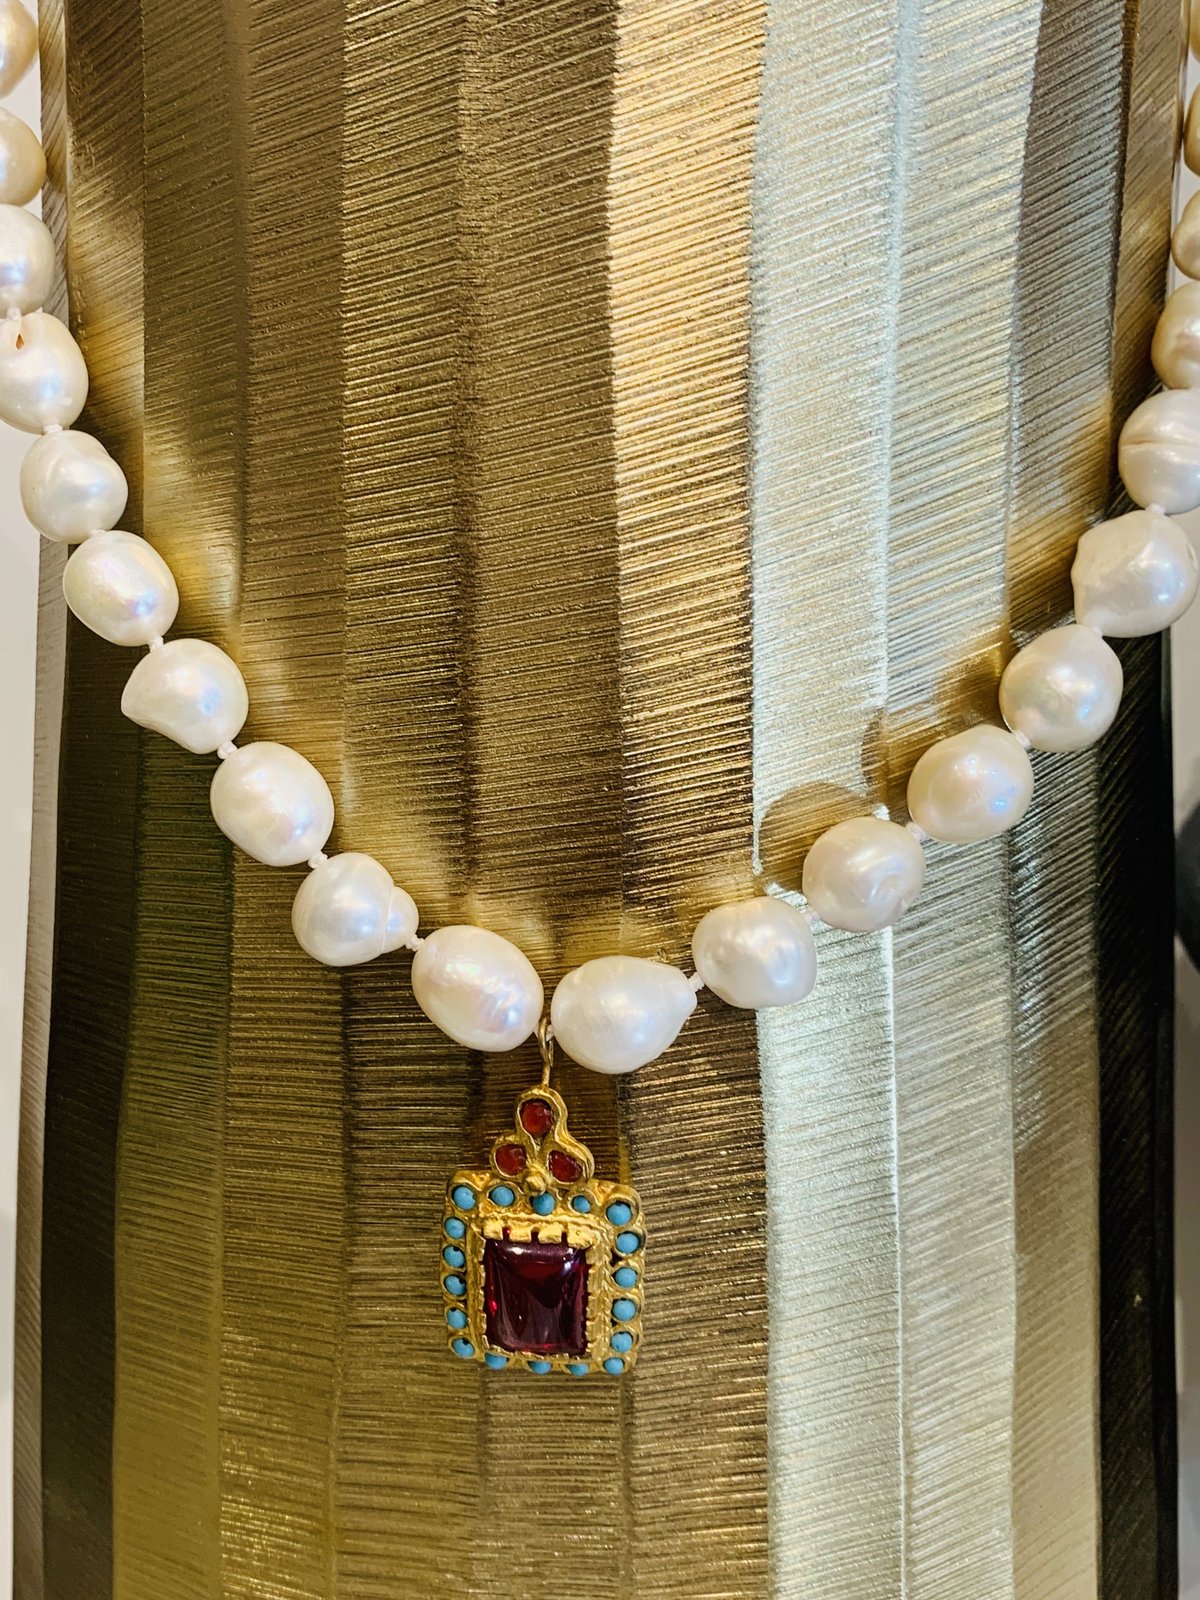 "Want It" Wednesday: The Teramasu Pearl Necklace Turquoise Gold Red Crystal Pendant is the Perfect Statement Necklace for Your Fall Style!